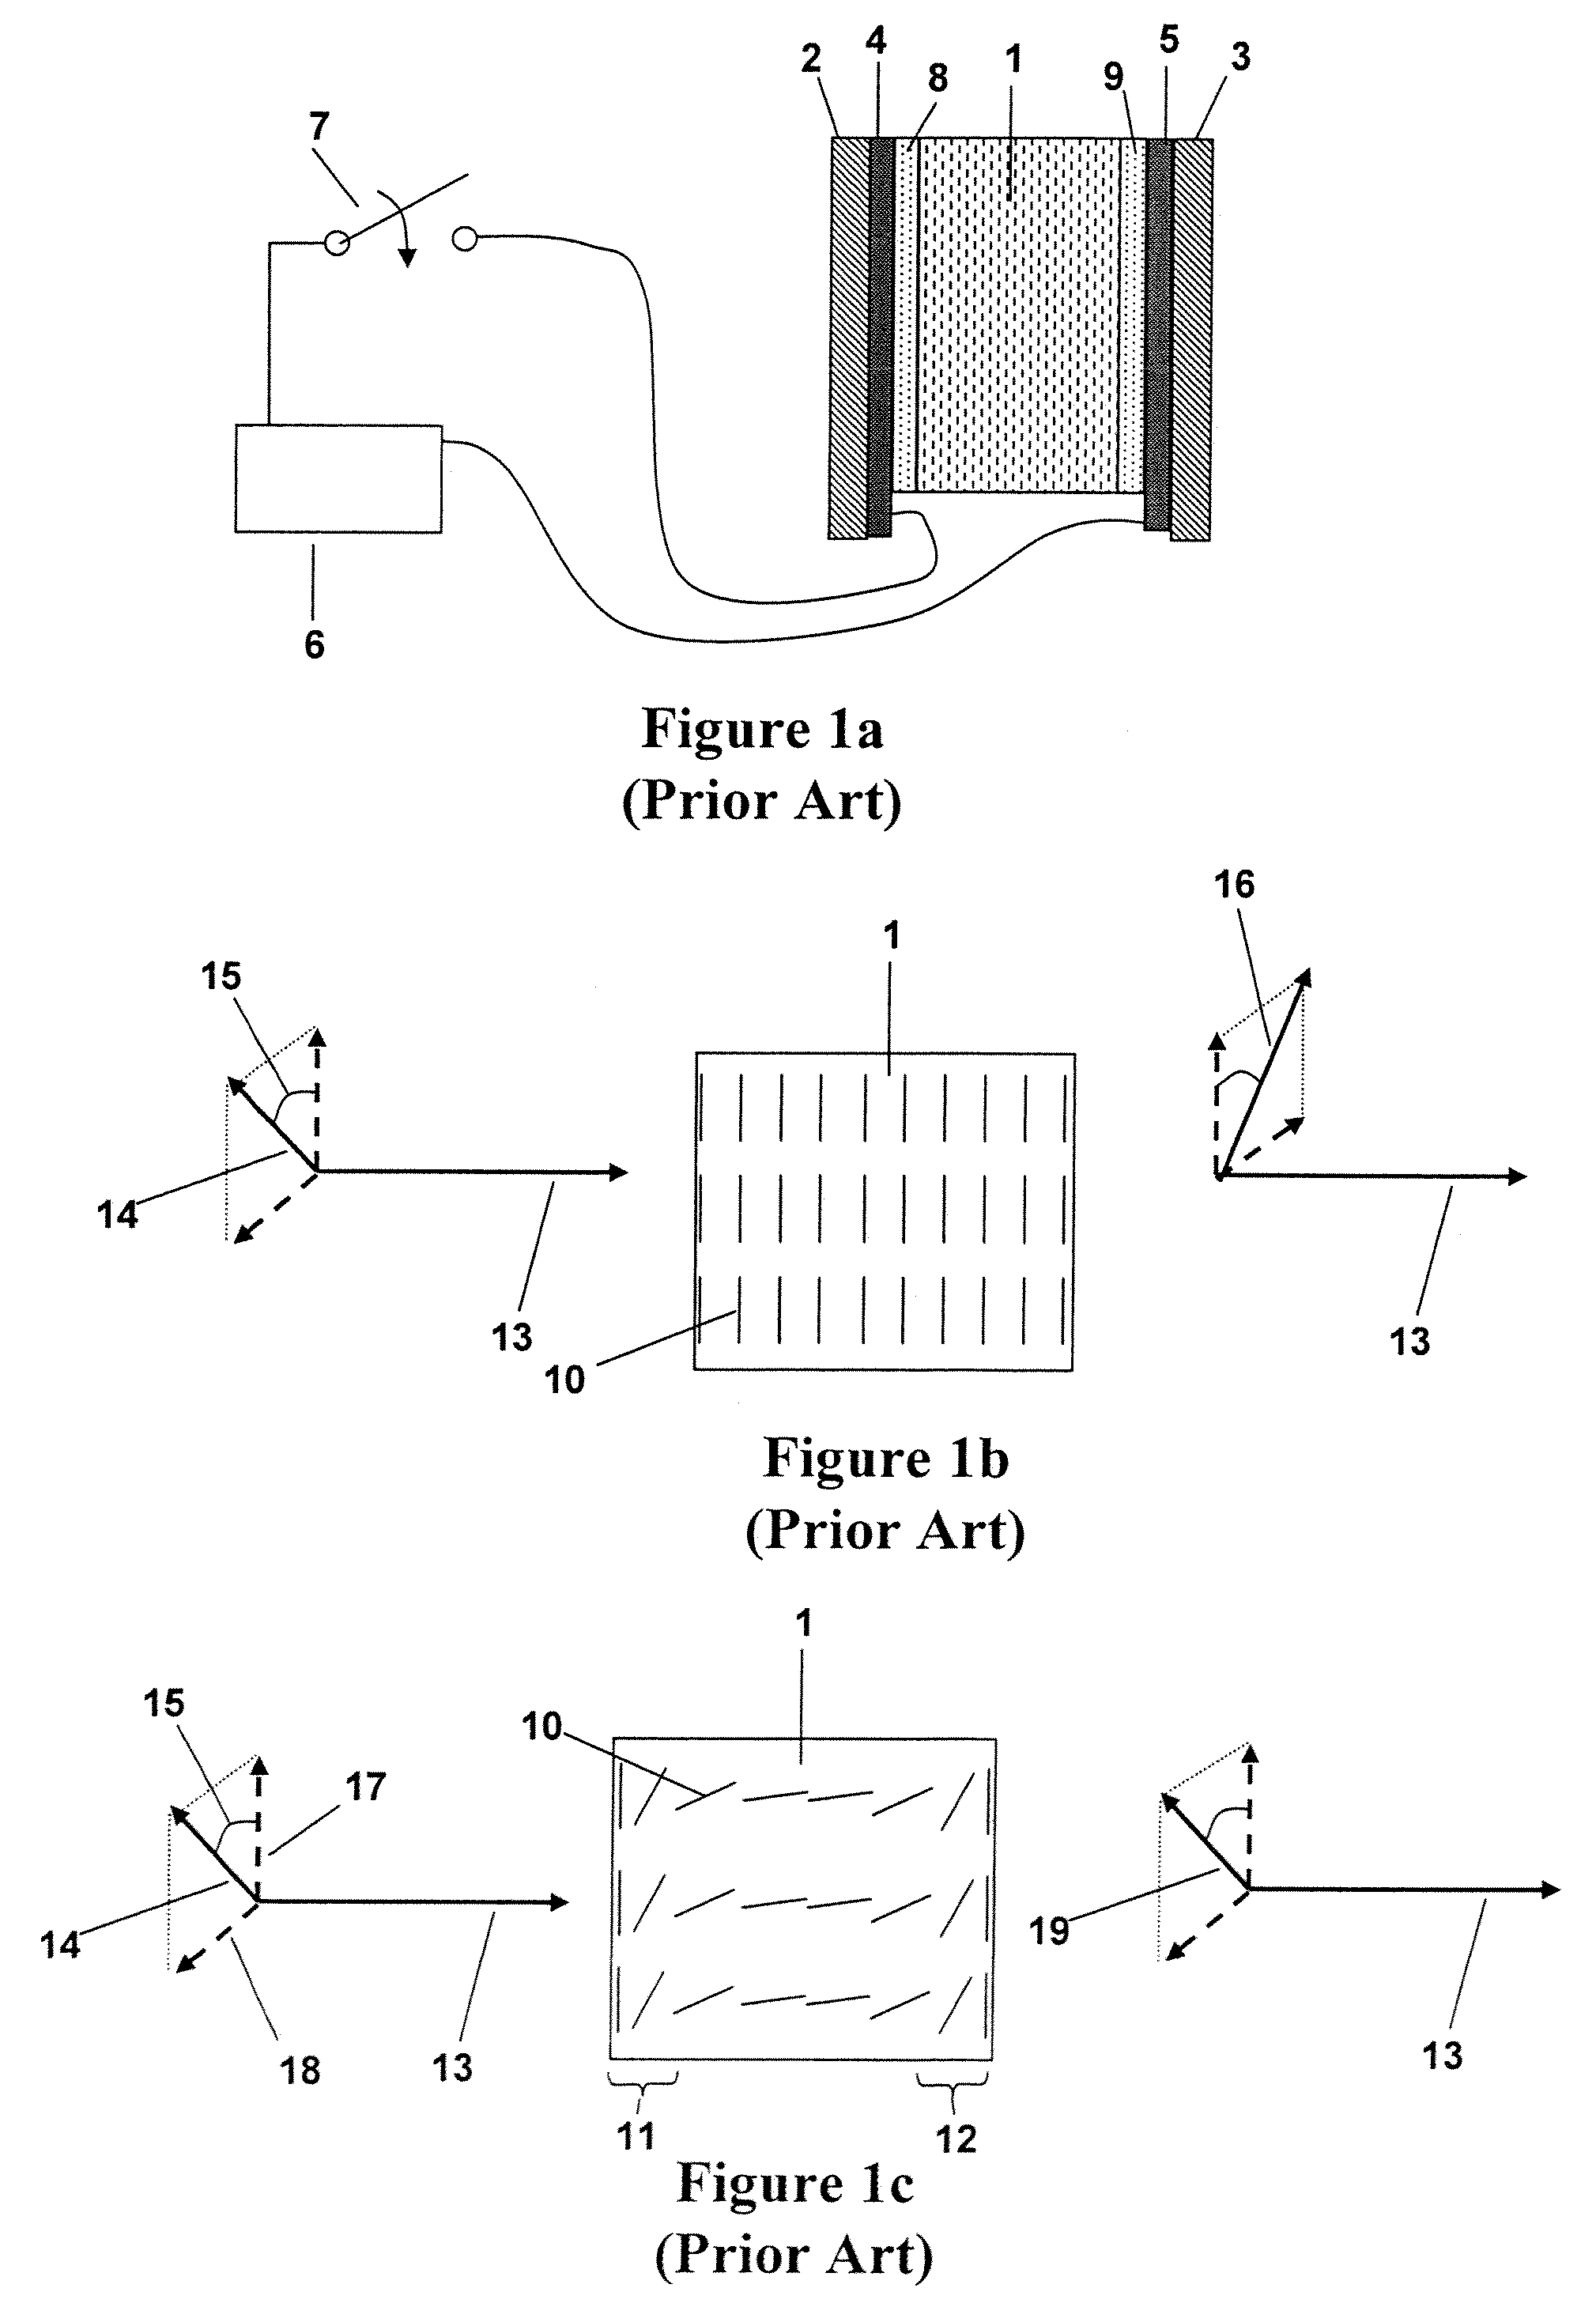 Apparatus and method for optical switching with liquid crystals and birefringent wedges